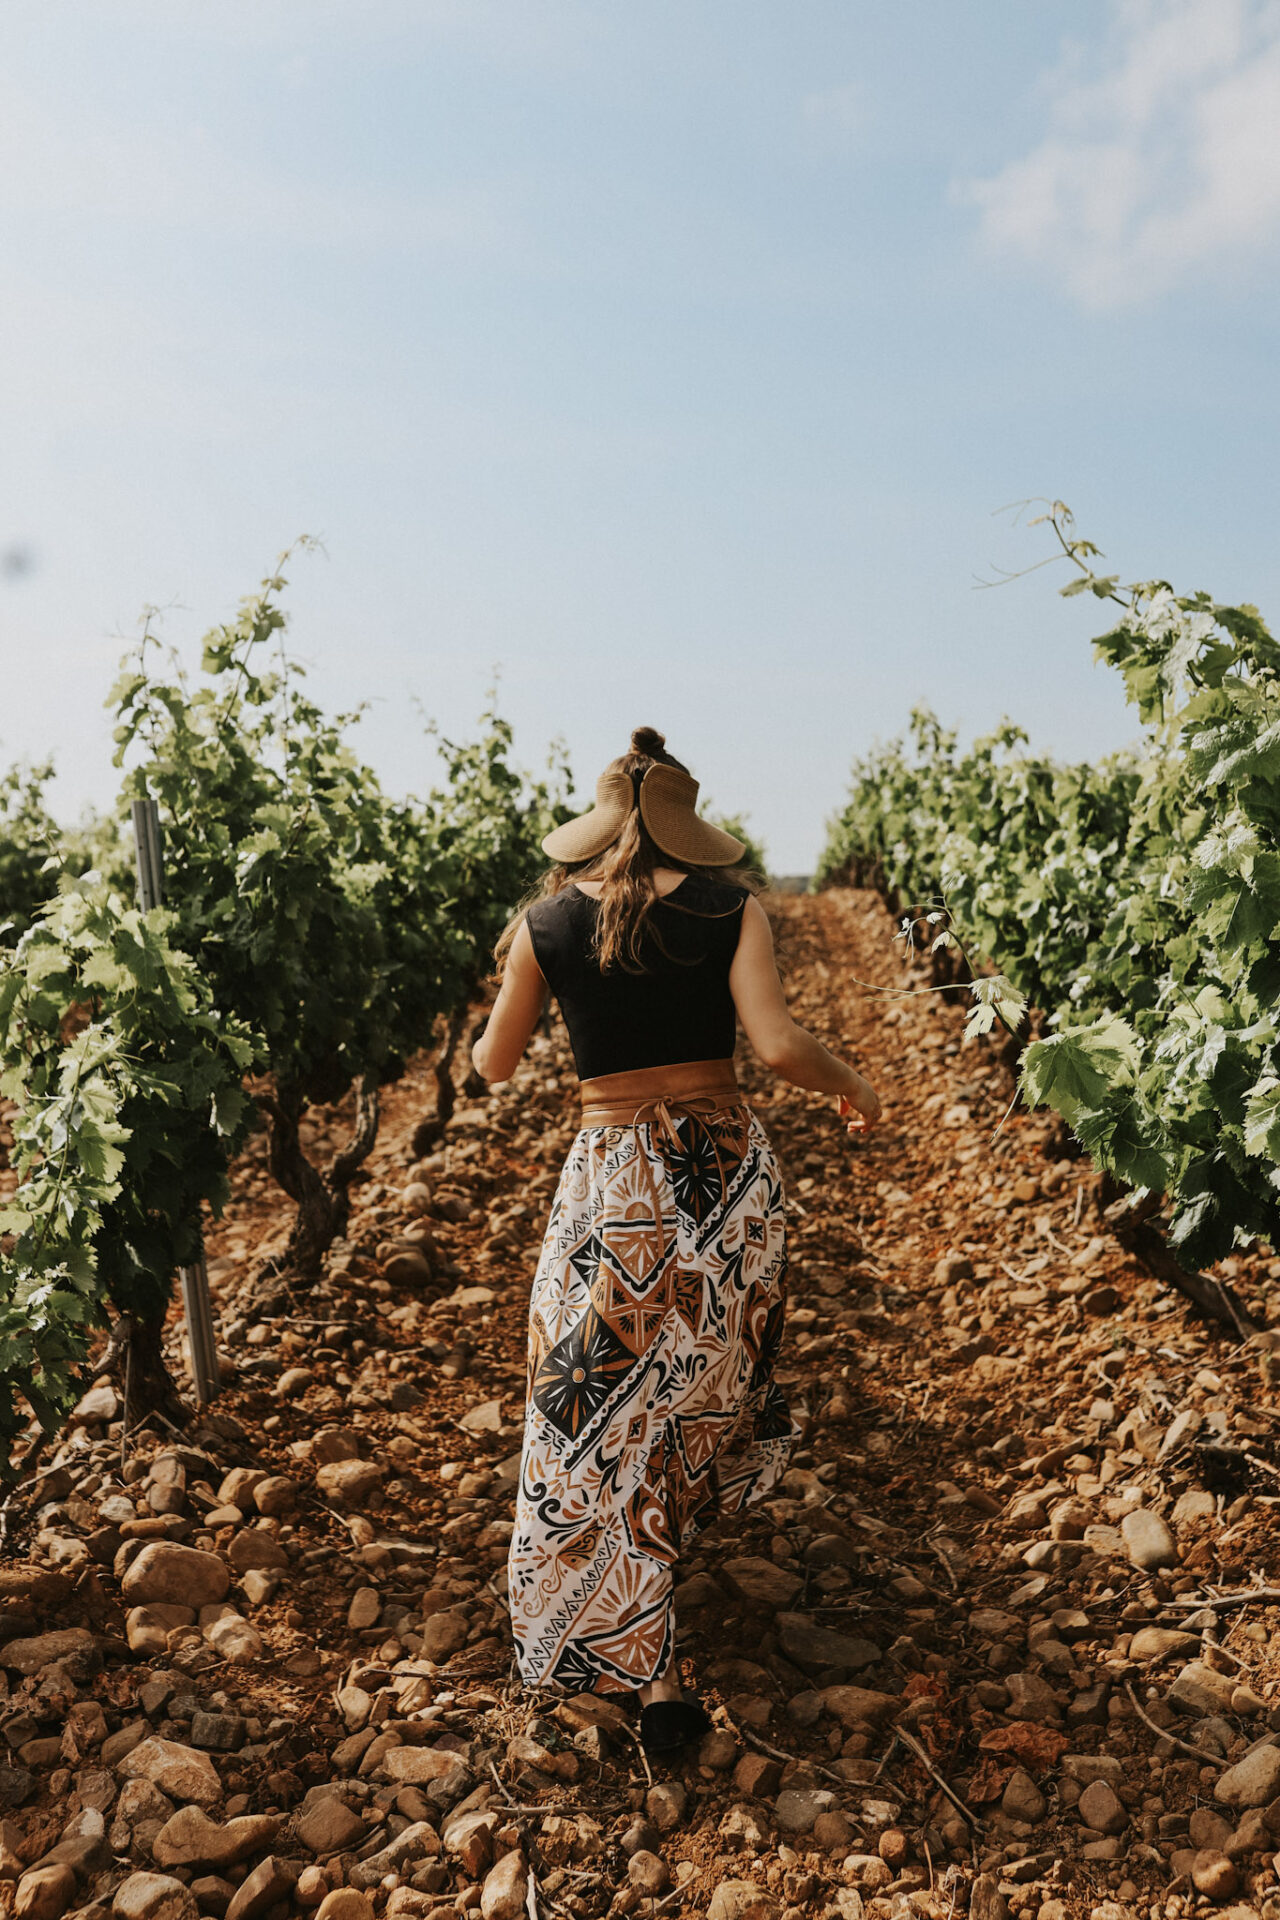 A lady walking in a Portuguese wine valley